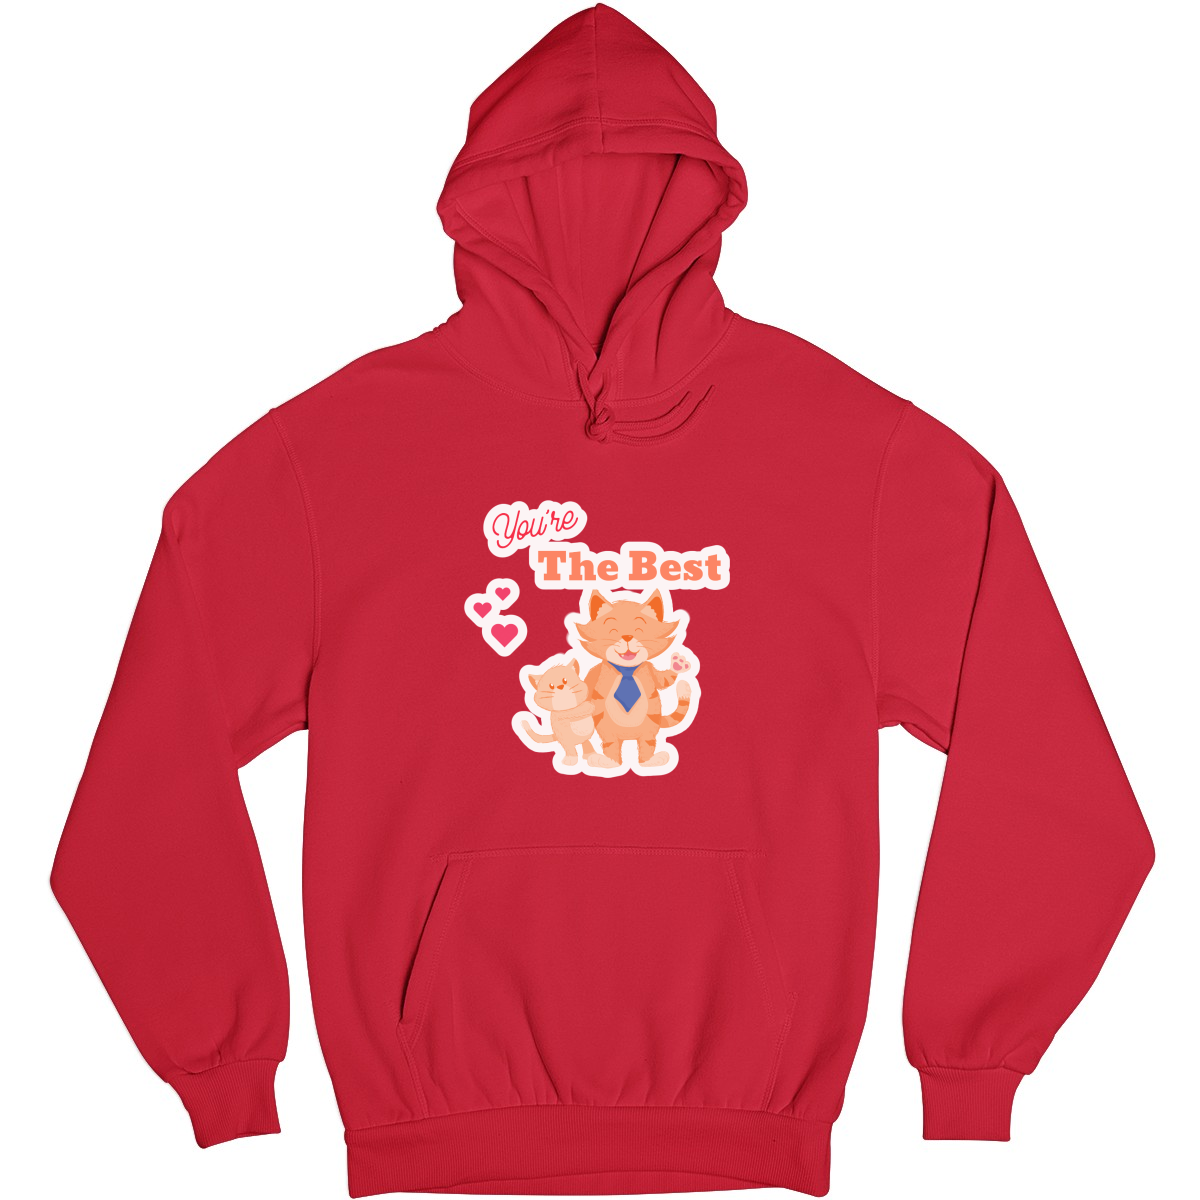 You are the best Unisex Hoodie | Red